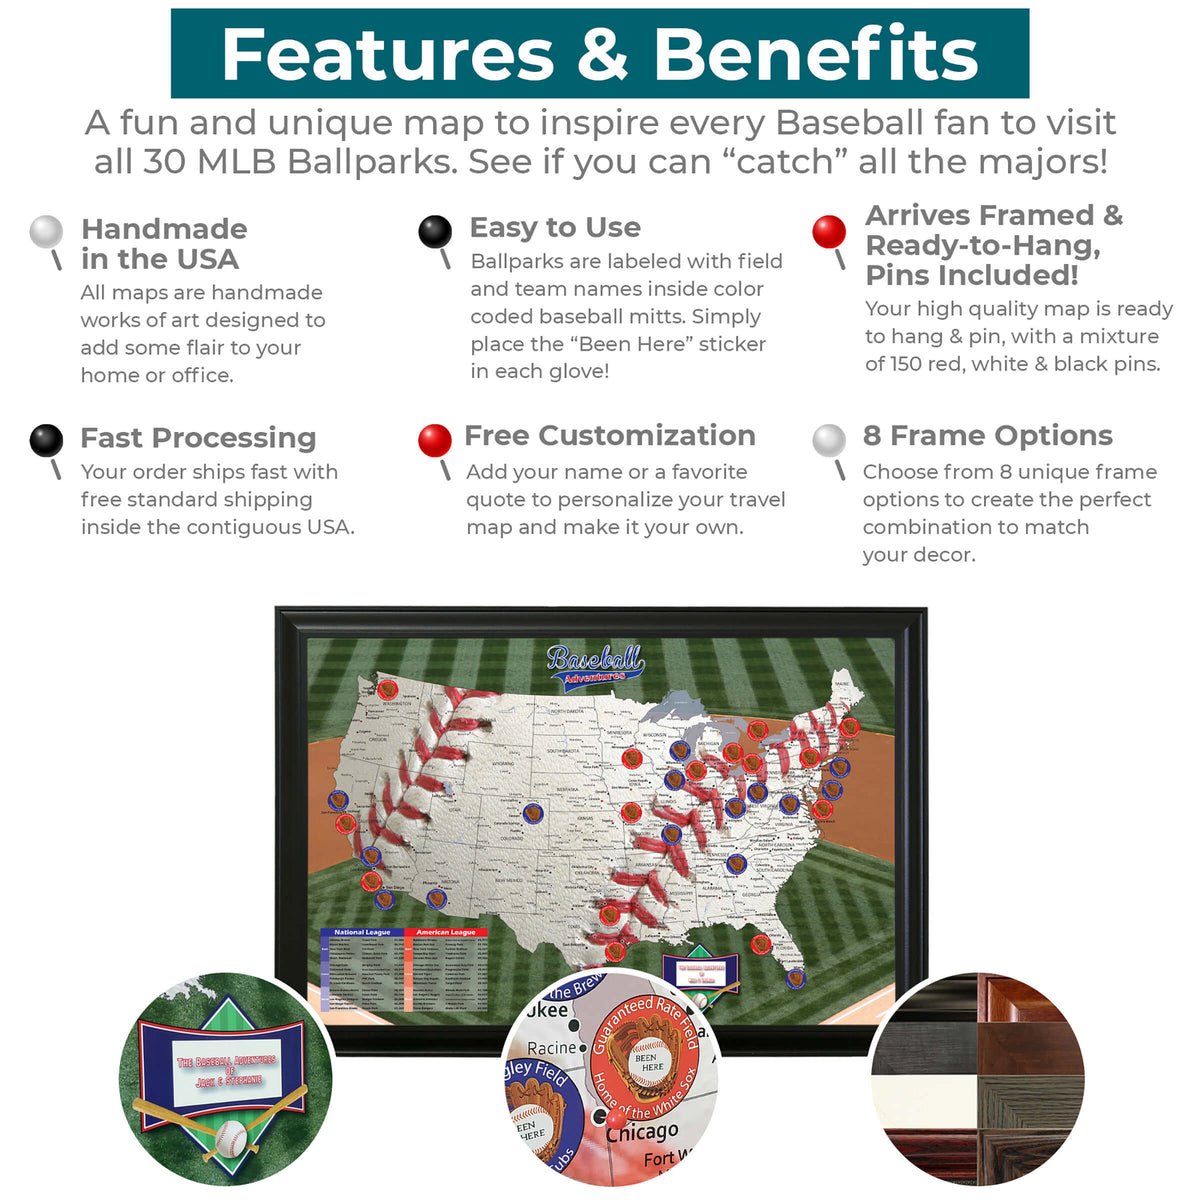 MLB Baseball Adventures Push Pin Travel Map Features and Benefits